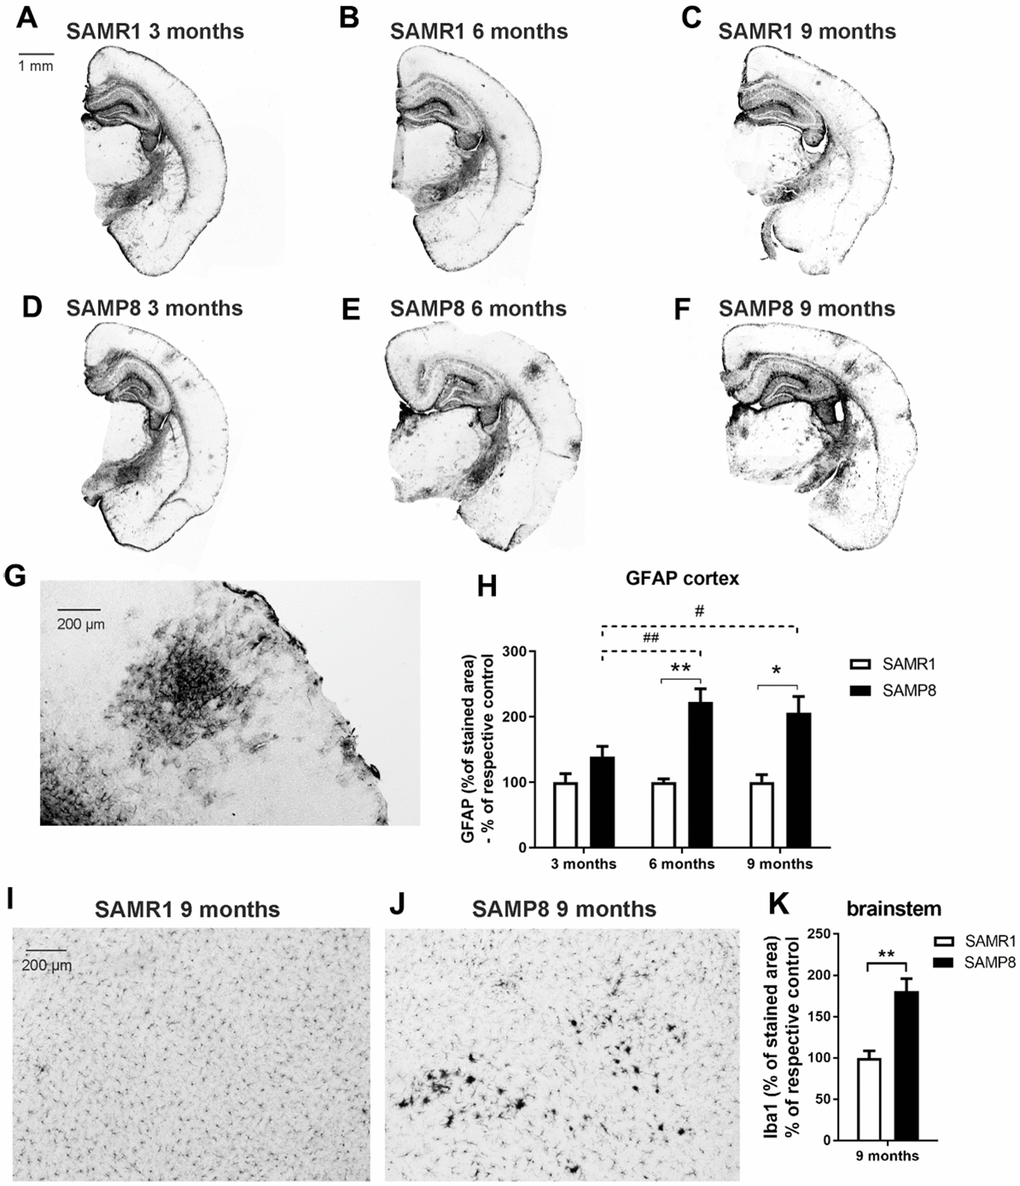 Increased neuroinflammation in the brains of SAMP8 mice: (A–G) marker of reactive astrocytes GFAP in the cortex, and (H) its quantification, and (I, J) marker of microglia Iba1 in the brainstem and (K) its quantification. Data are mean ± SEM, analyzed by 2-way ANOVA with Bonferroni post test (GFAP) or t-test (Iba1). Significance is *P 